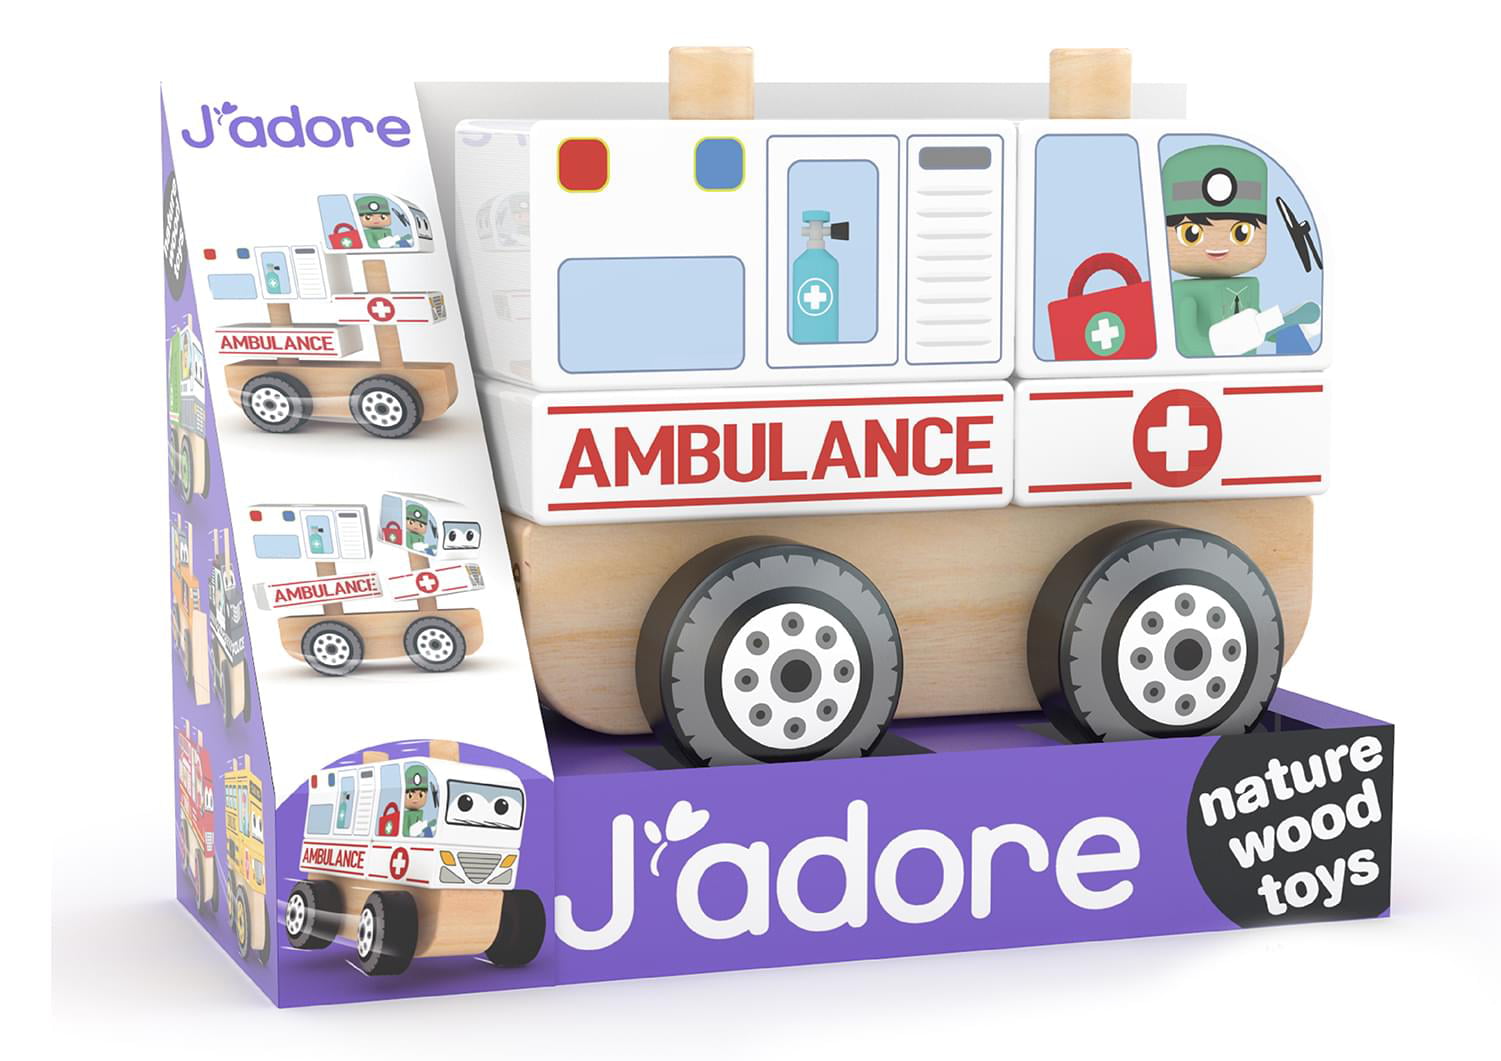 vintage style Details about   Ambulance high quality wooden toy handcrafted handmade 